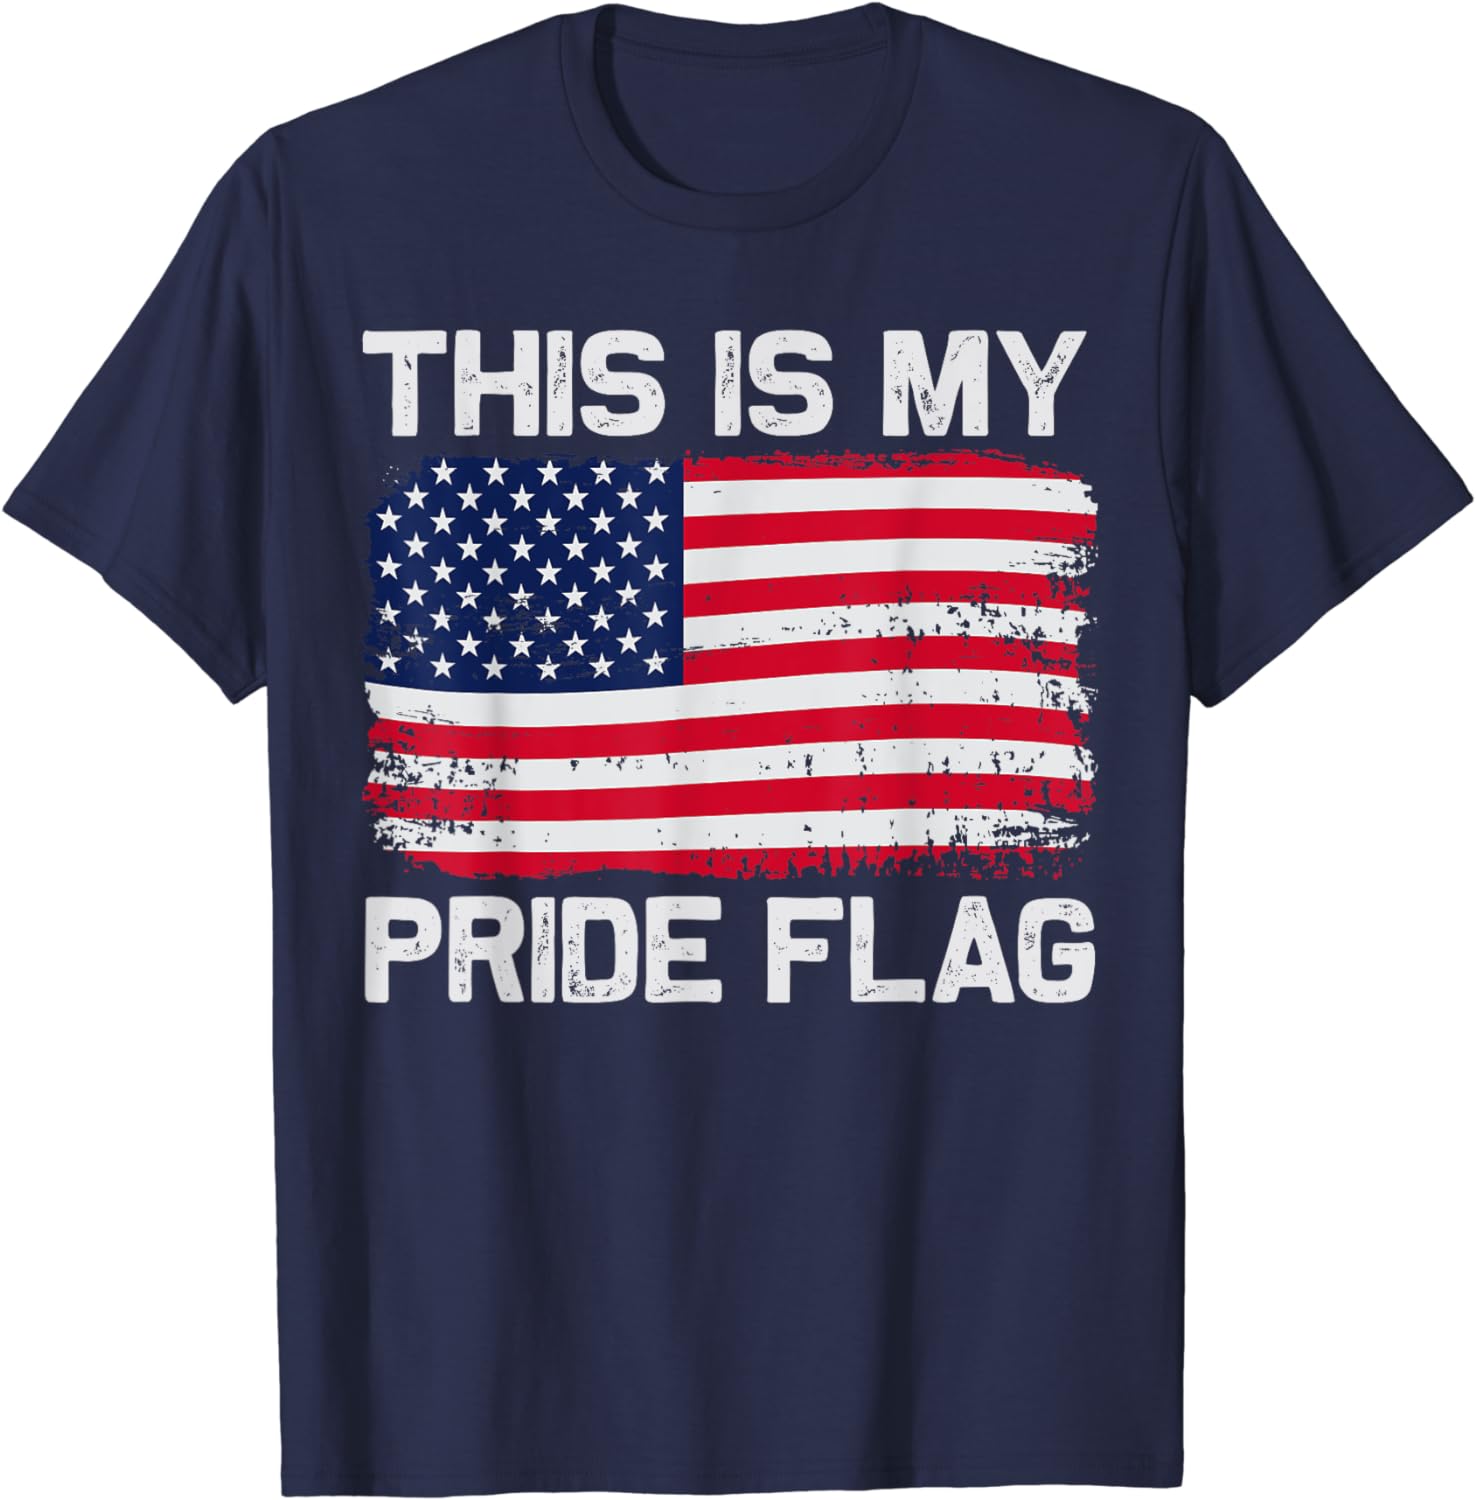 This Is My Pride Flag T-Shirt